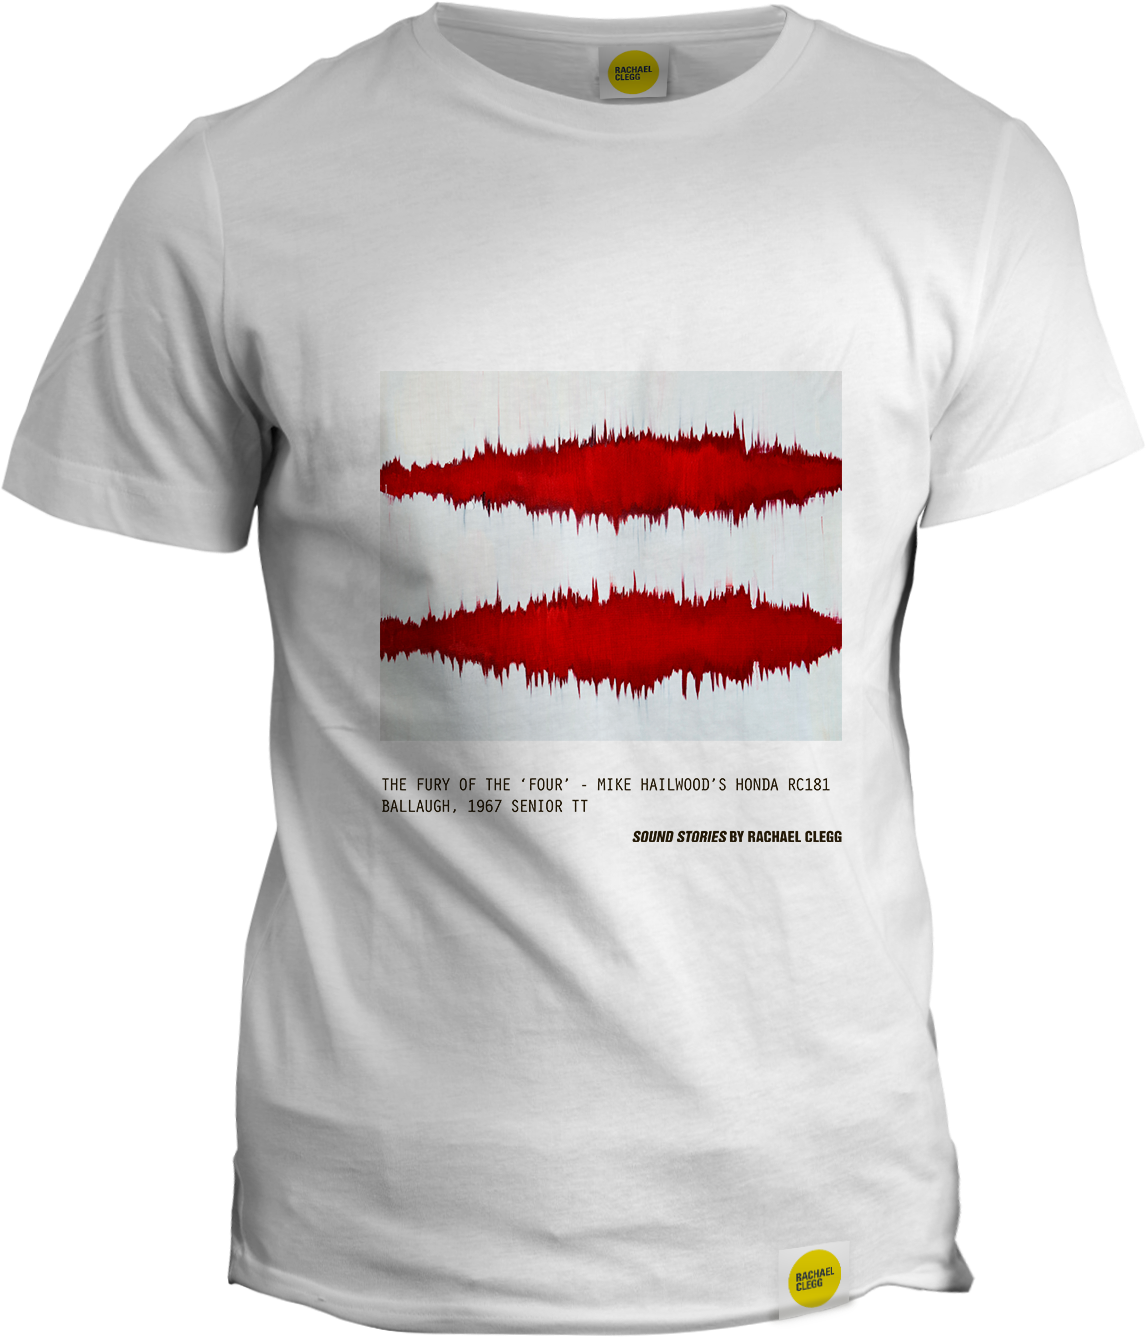 Image Of Rachael Clegg's Sound Stories - Indian Air Force T Shirt (1600x1600), Png Download